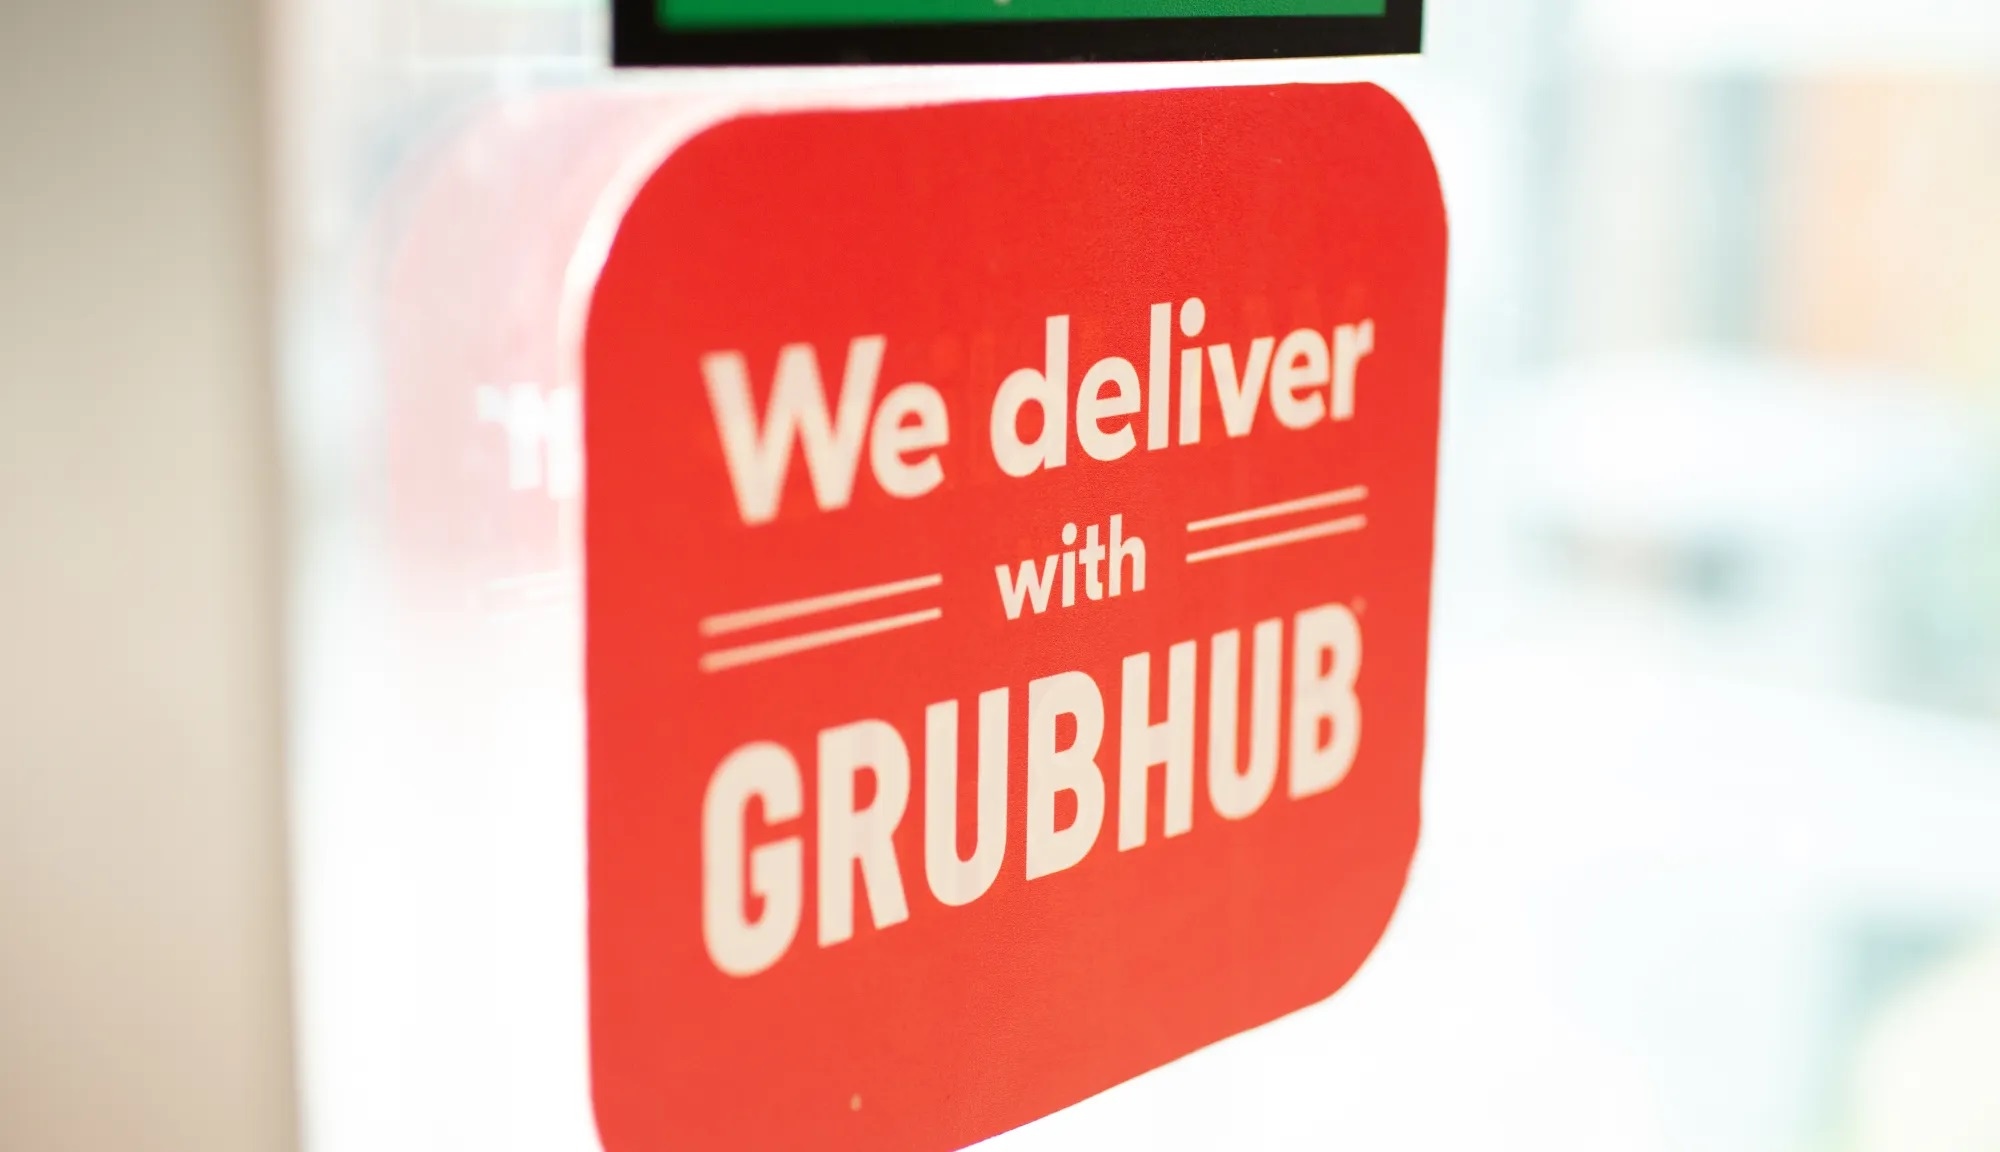 Grubhub announced the layoff of 400 corporate employees